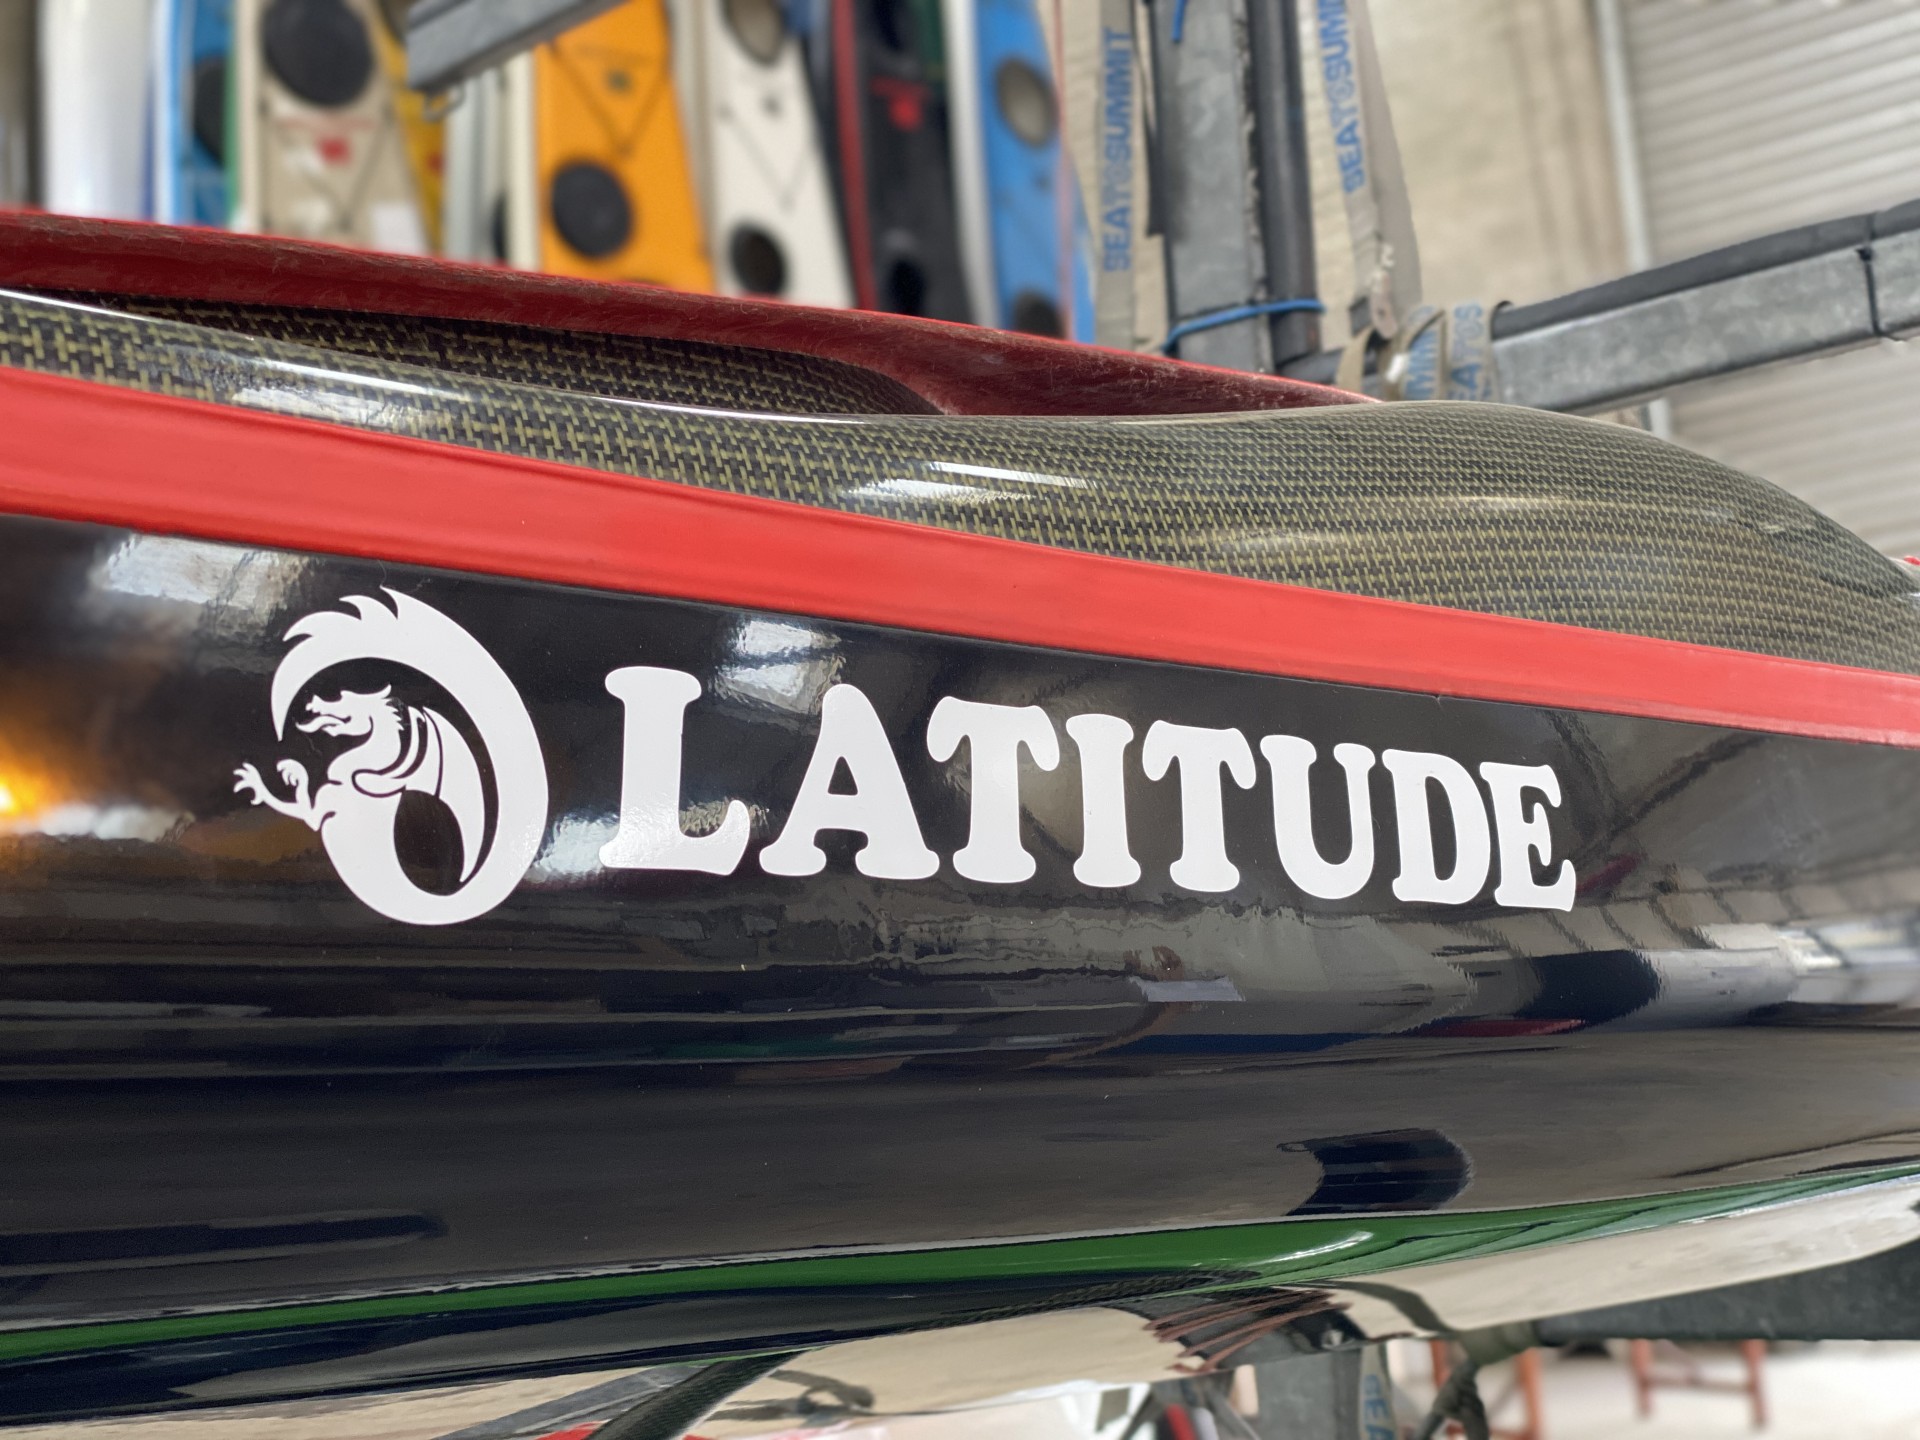 Latitude composite sea kayak with carbon composite deck and red trim